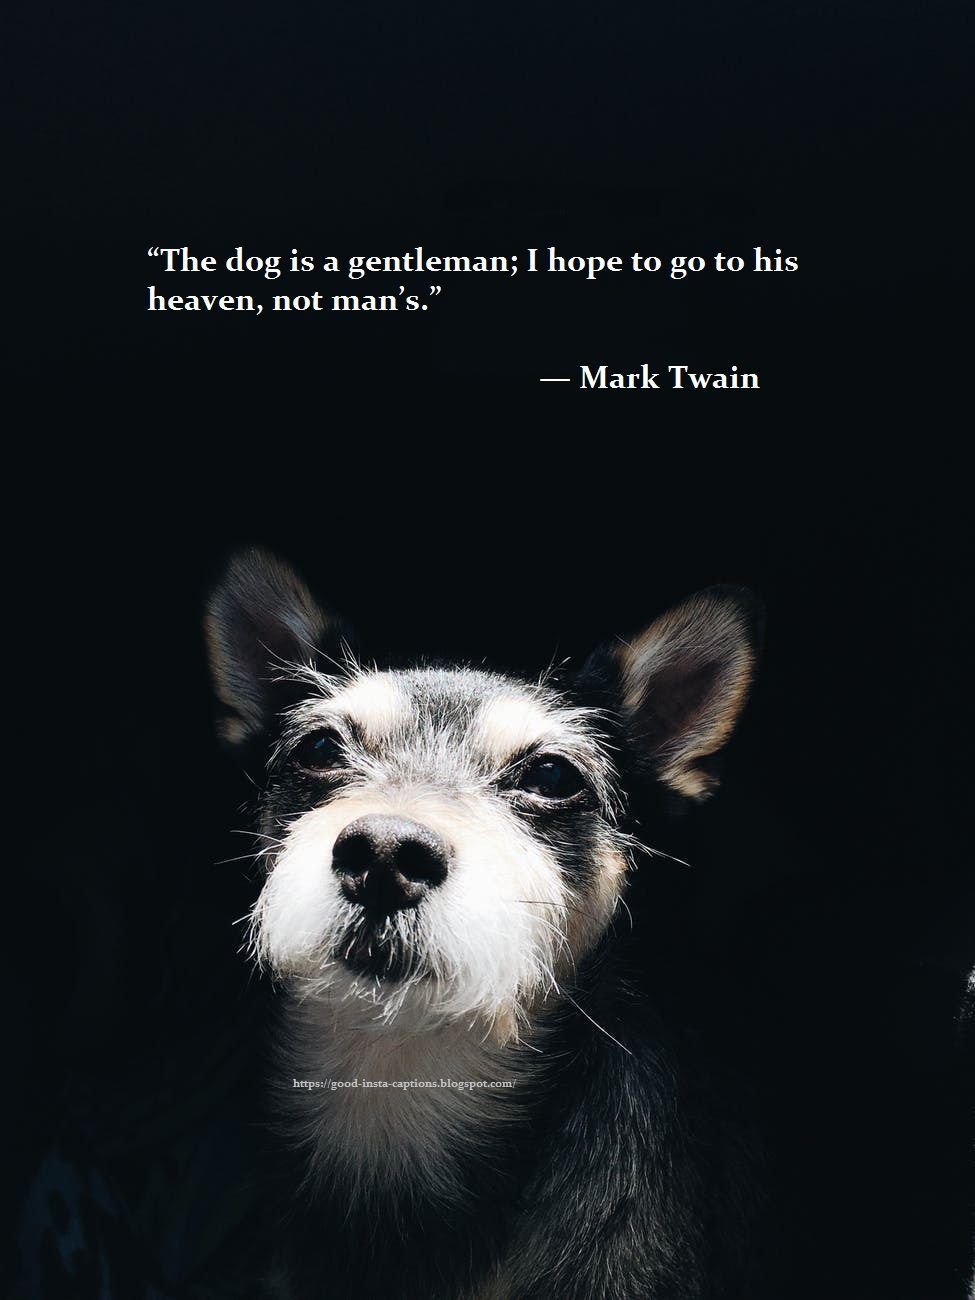 Funny dog quotes by Mark Twain. Dog quotes, Puppy quotes, Dog quotes funny